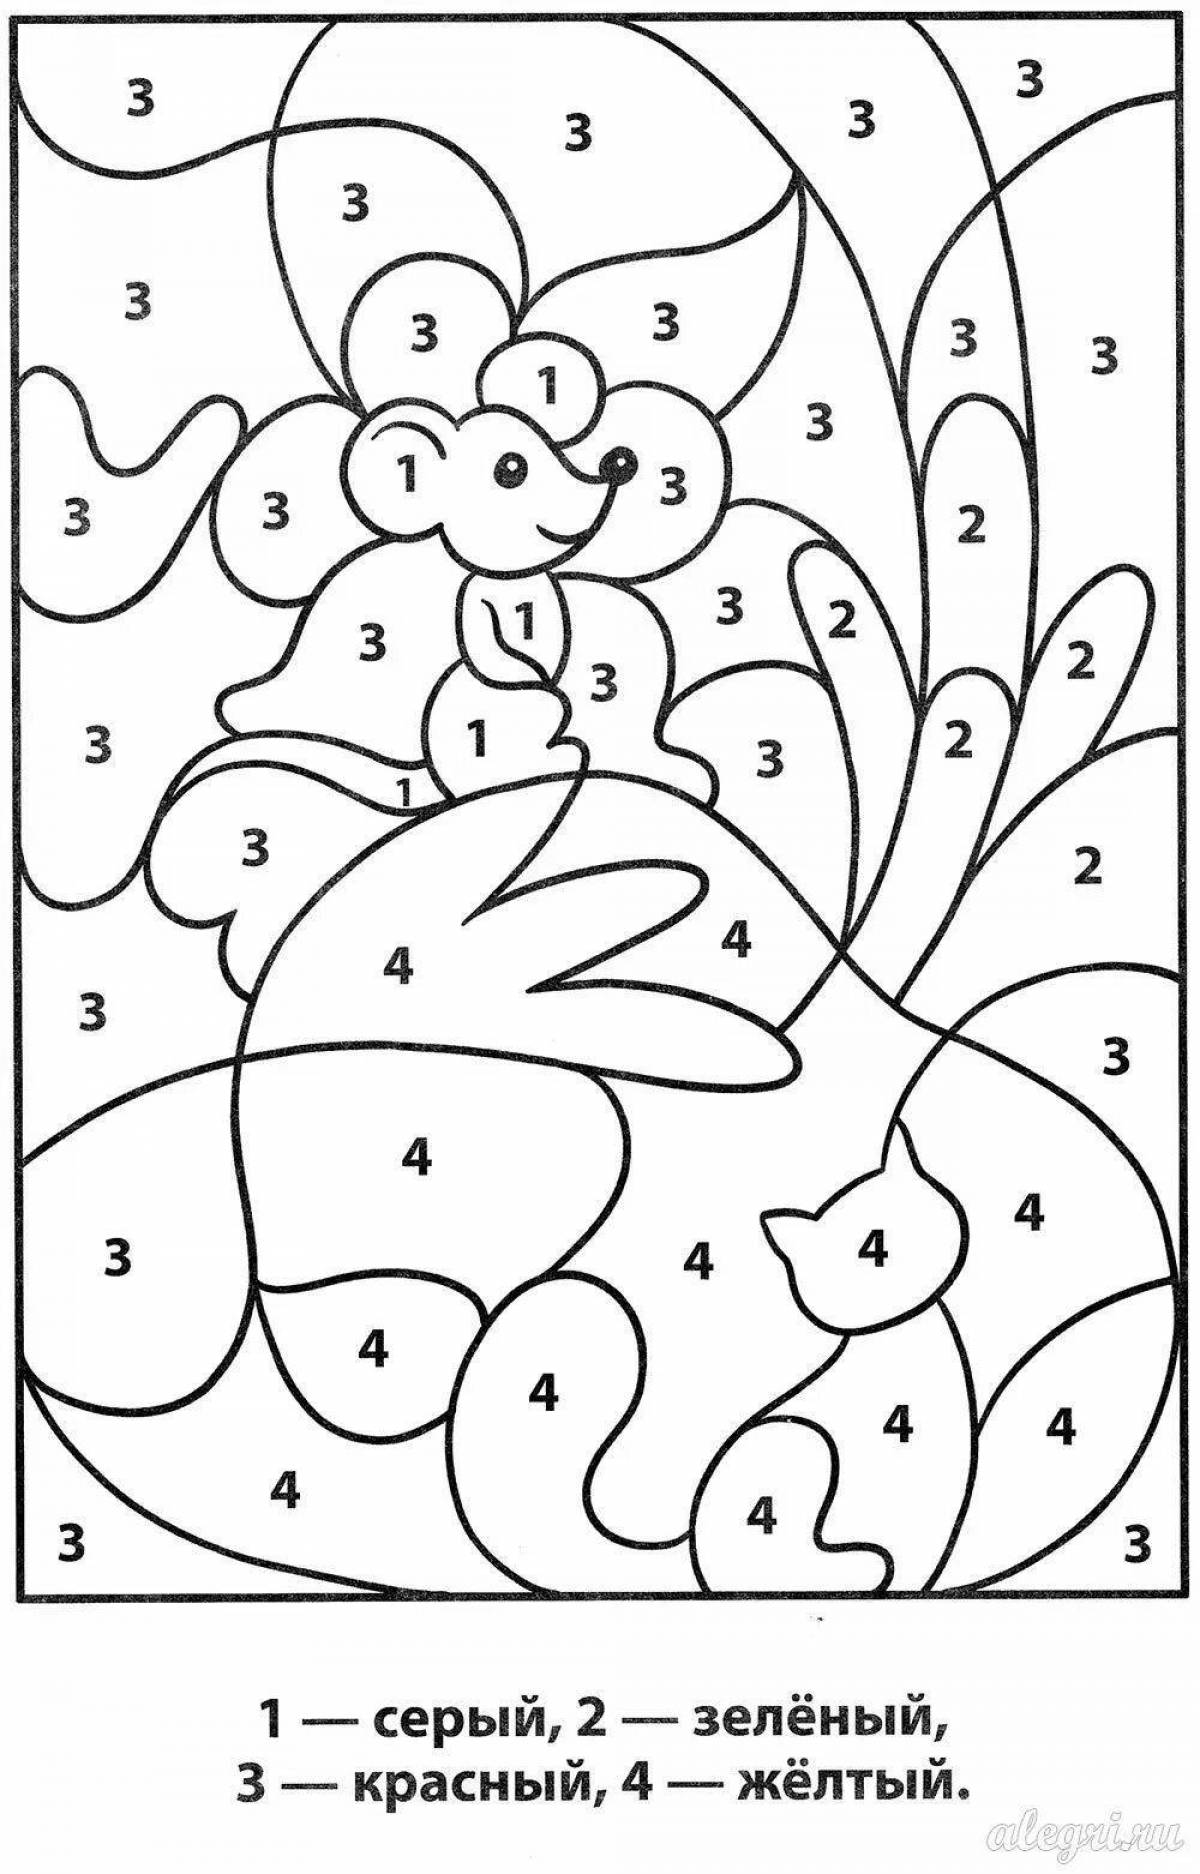 Crazy coloring book for kids 3-4 years old by numbers